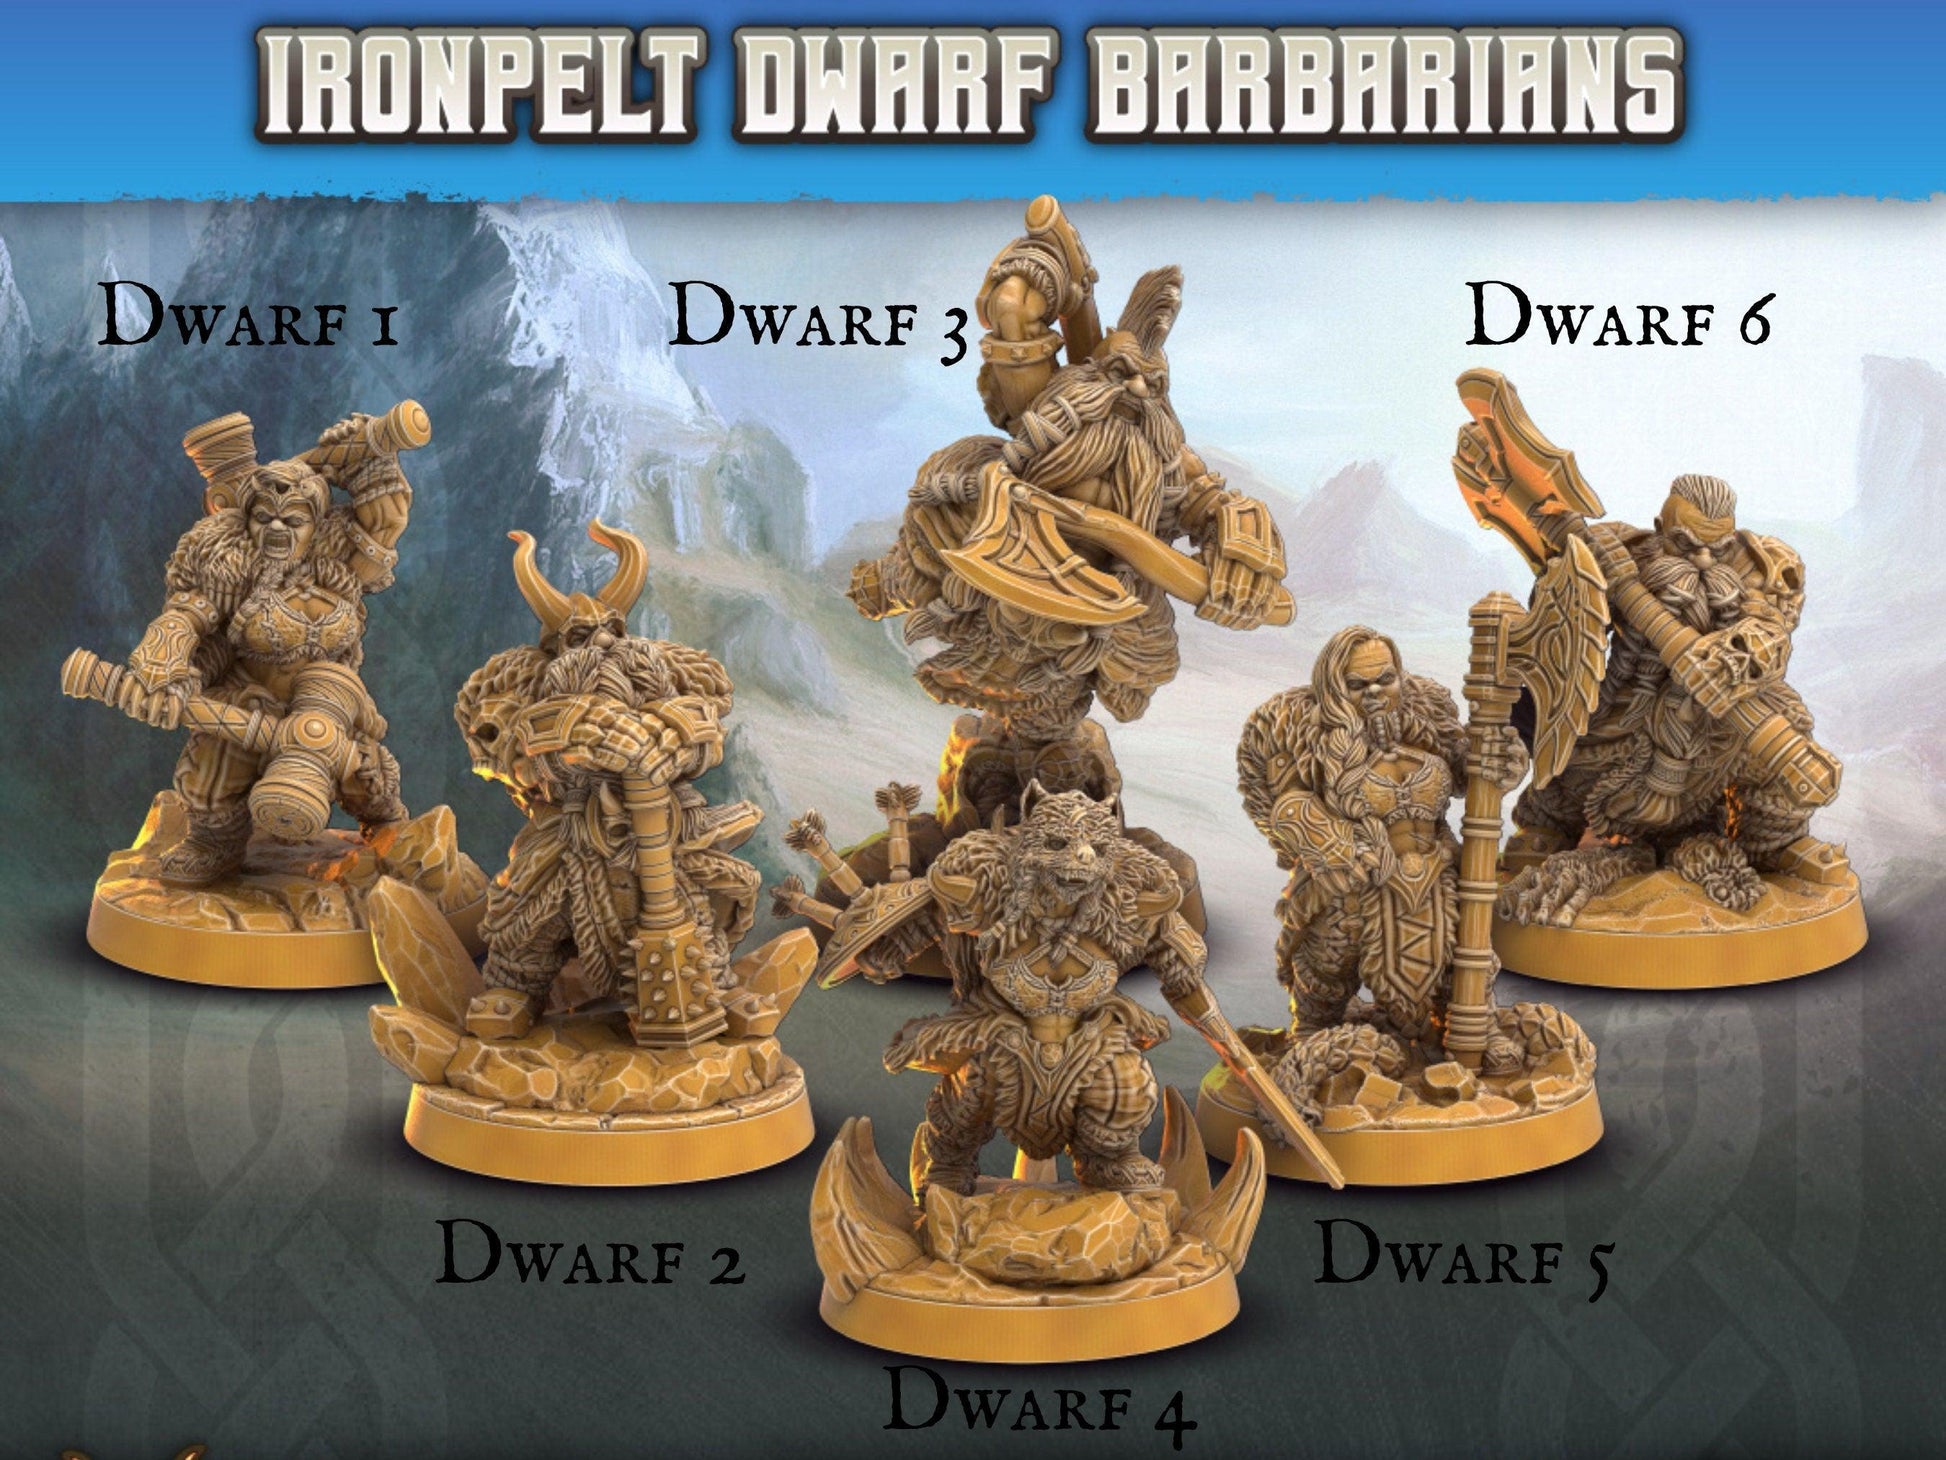 Dwarf Barbarian Miniatures | Dragon's Forge | 28mm Scale | DnD Miniature | Dungeons and Dragons | Dungeon Master - Plague Miniatures shop for DnD Miniatures